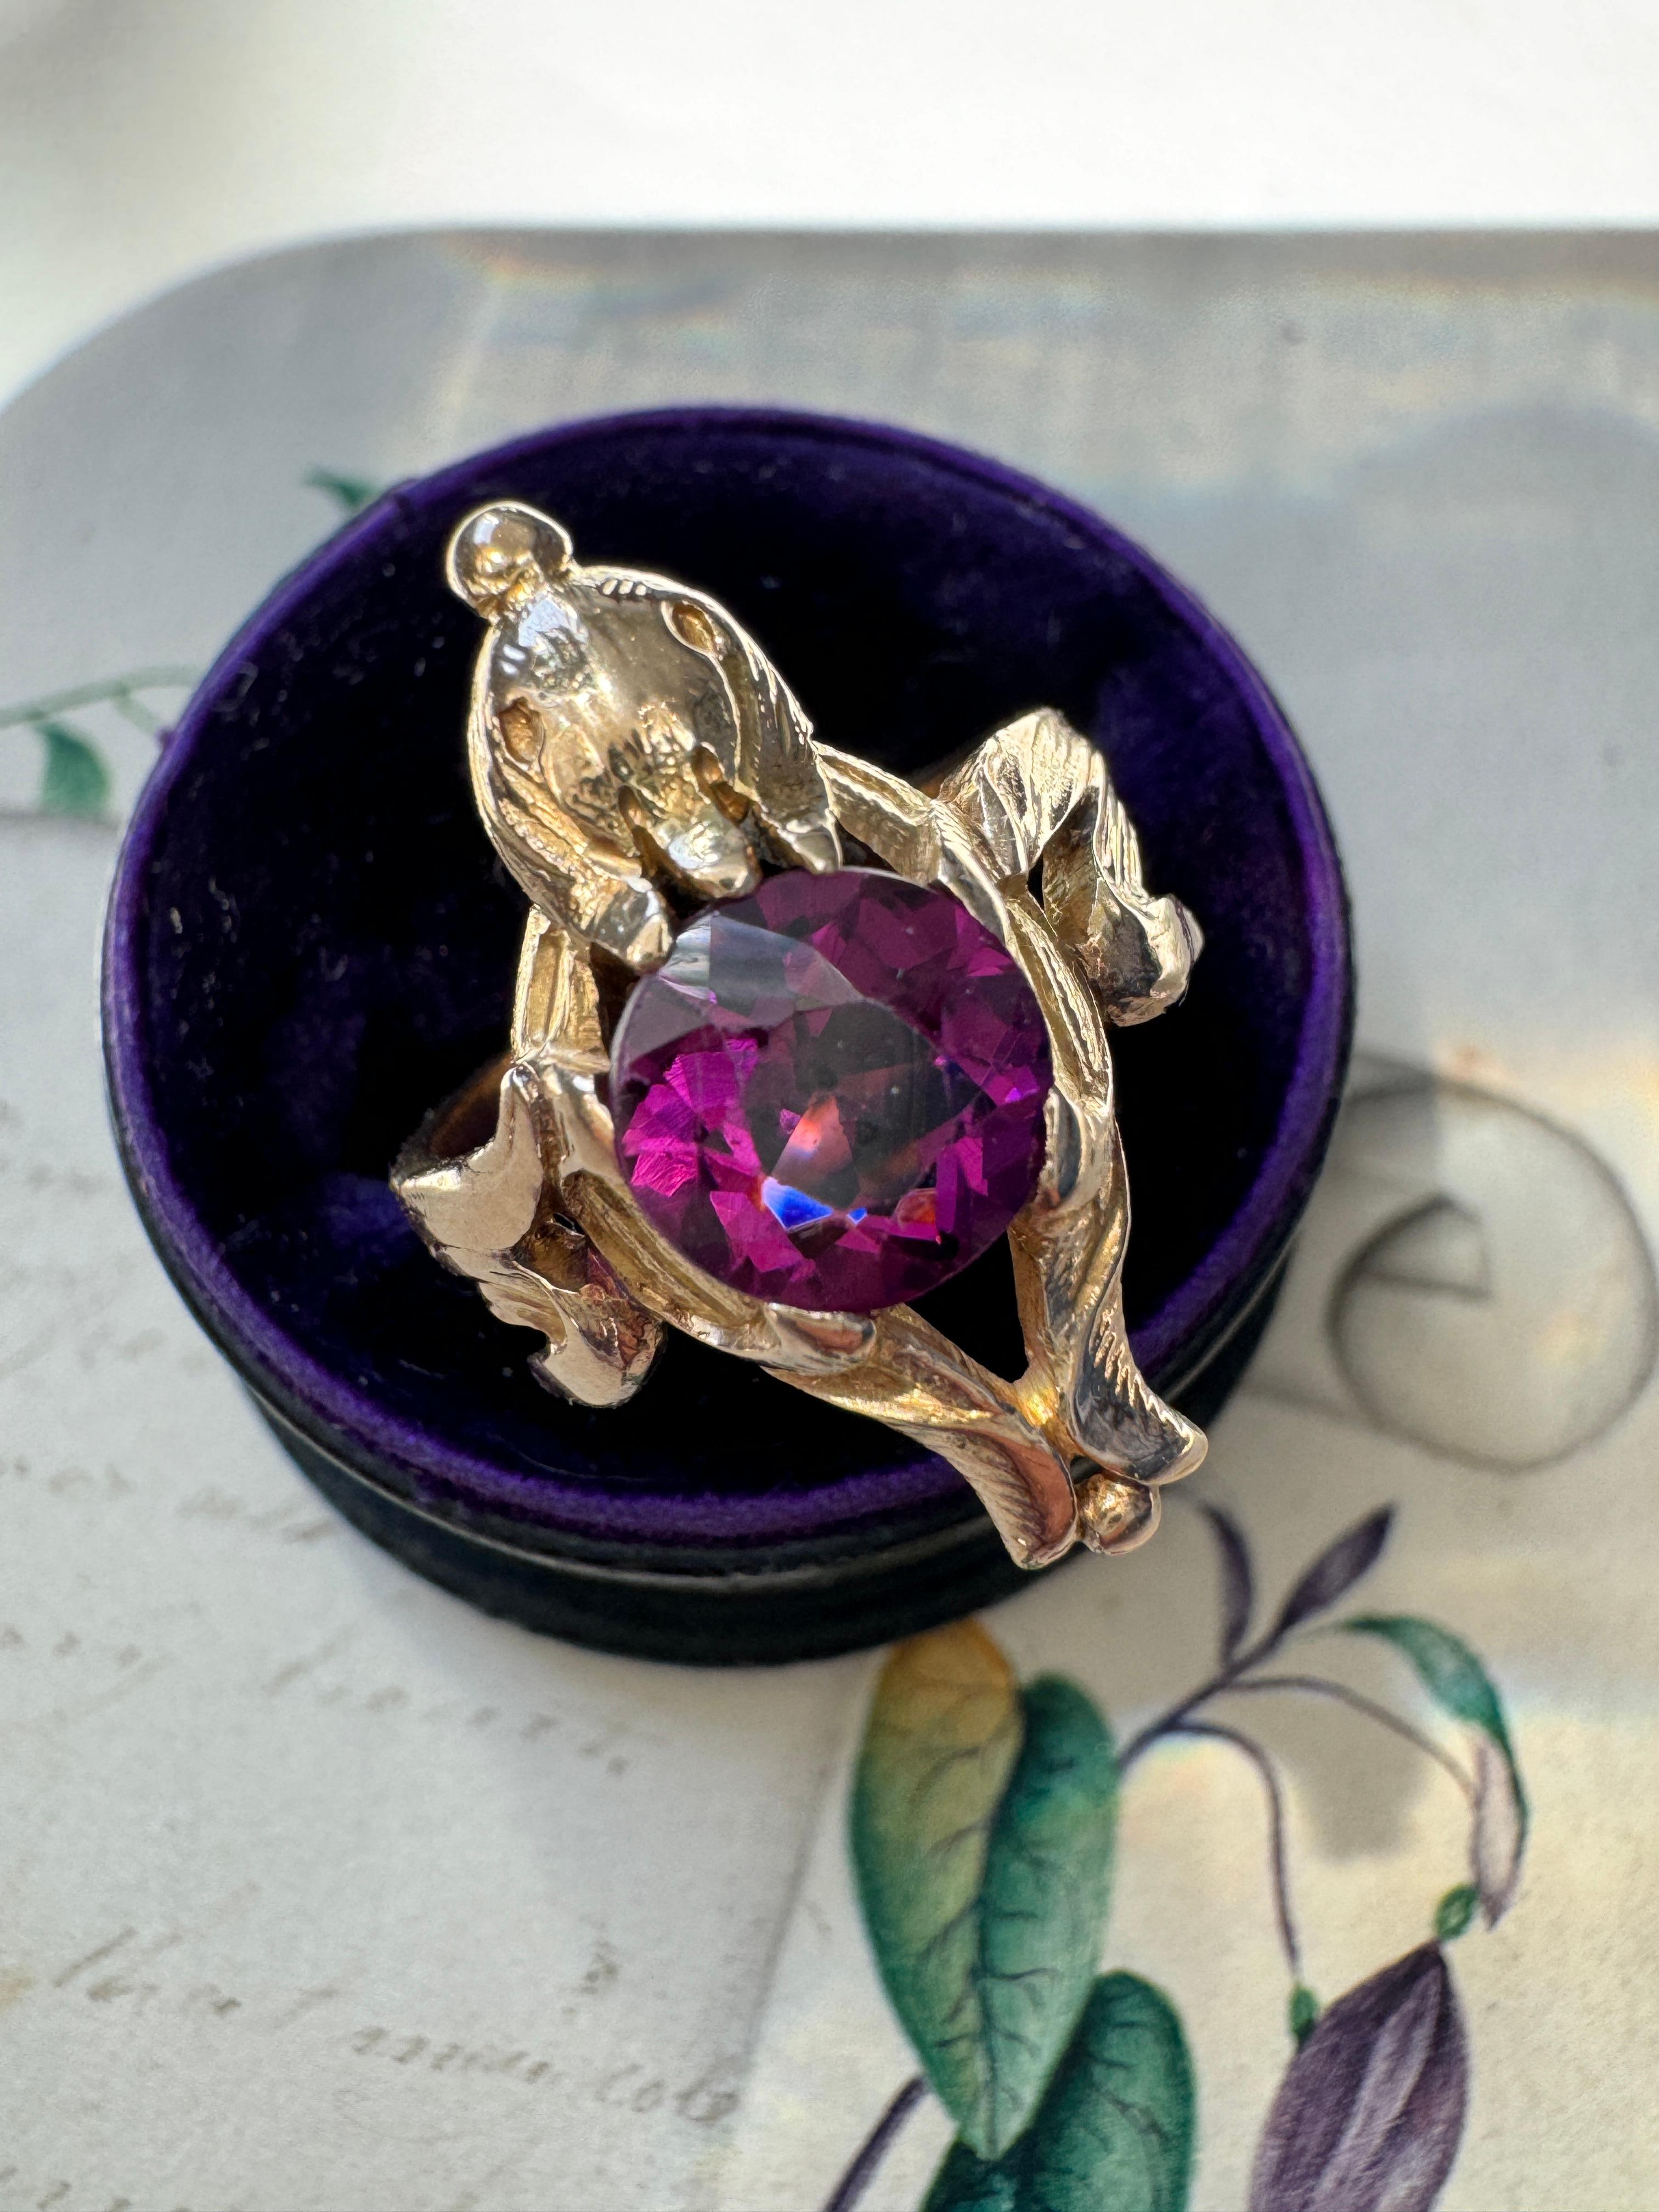 This charming Art Nouveau bird ring centers on a glowing 1.55 carat pinkish-purple rhodolite garnet held by a pair of sinuous leaves that double as stylized wings. Circa 1900, crafted in burnished 14k gold, hand textured throughout. Currently a ring